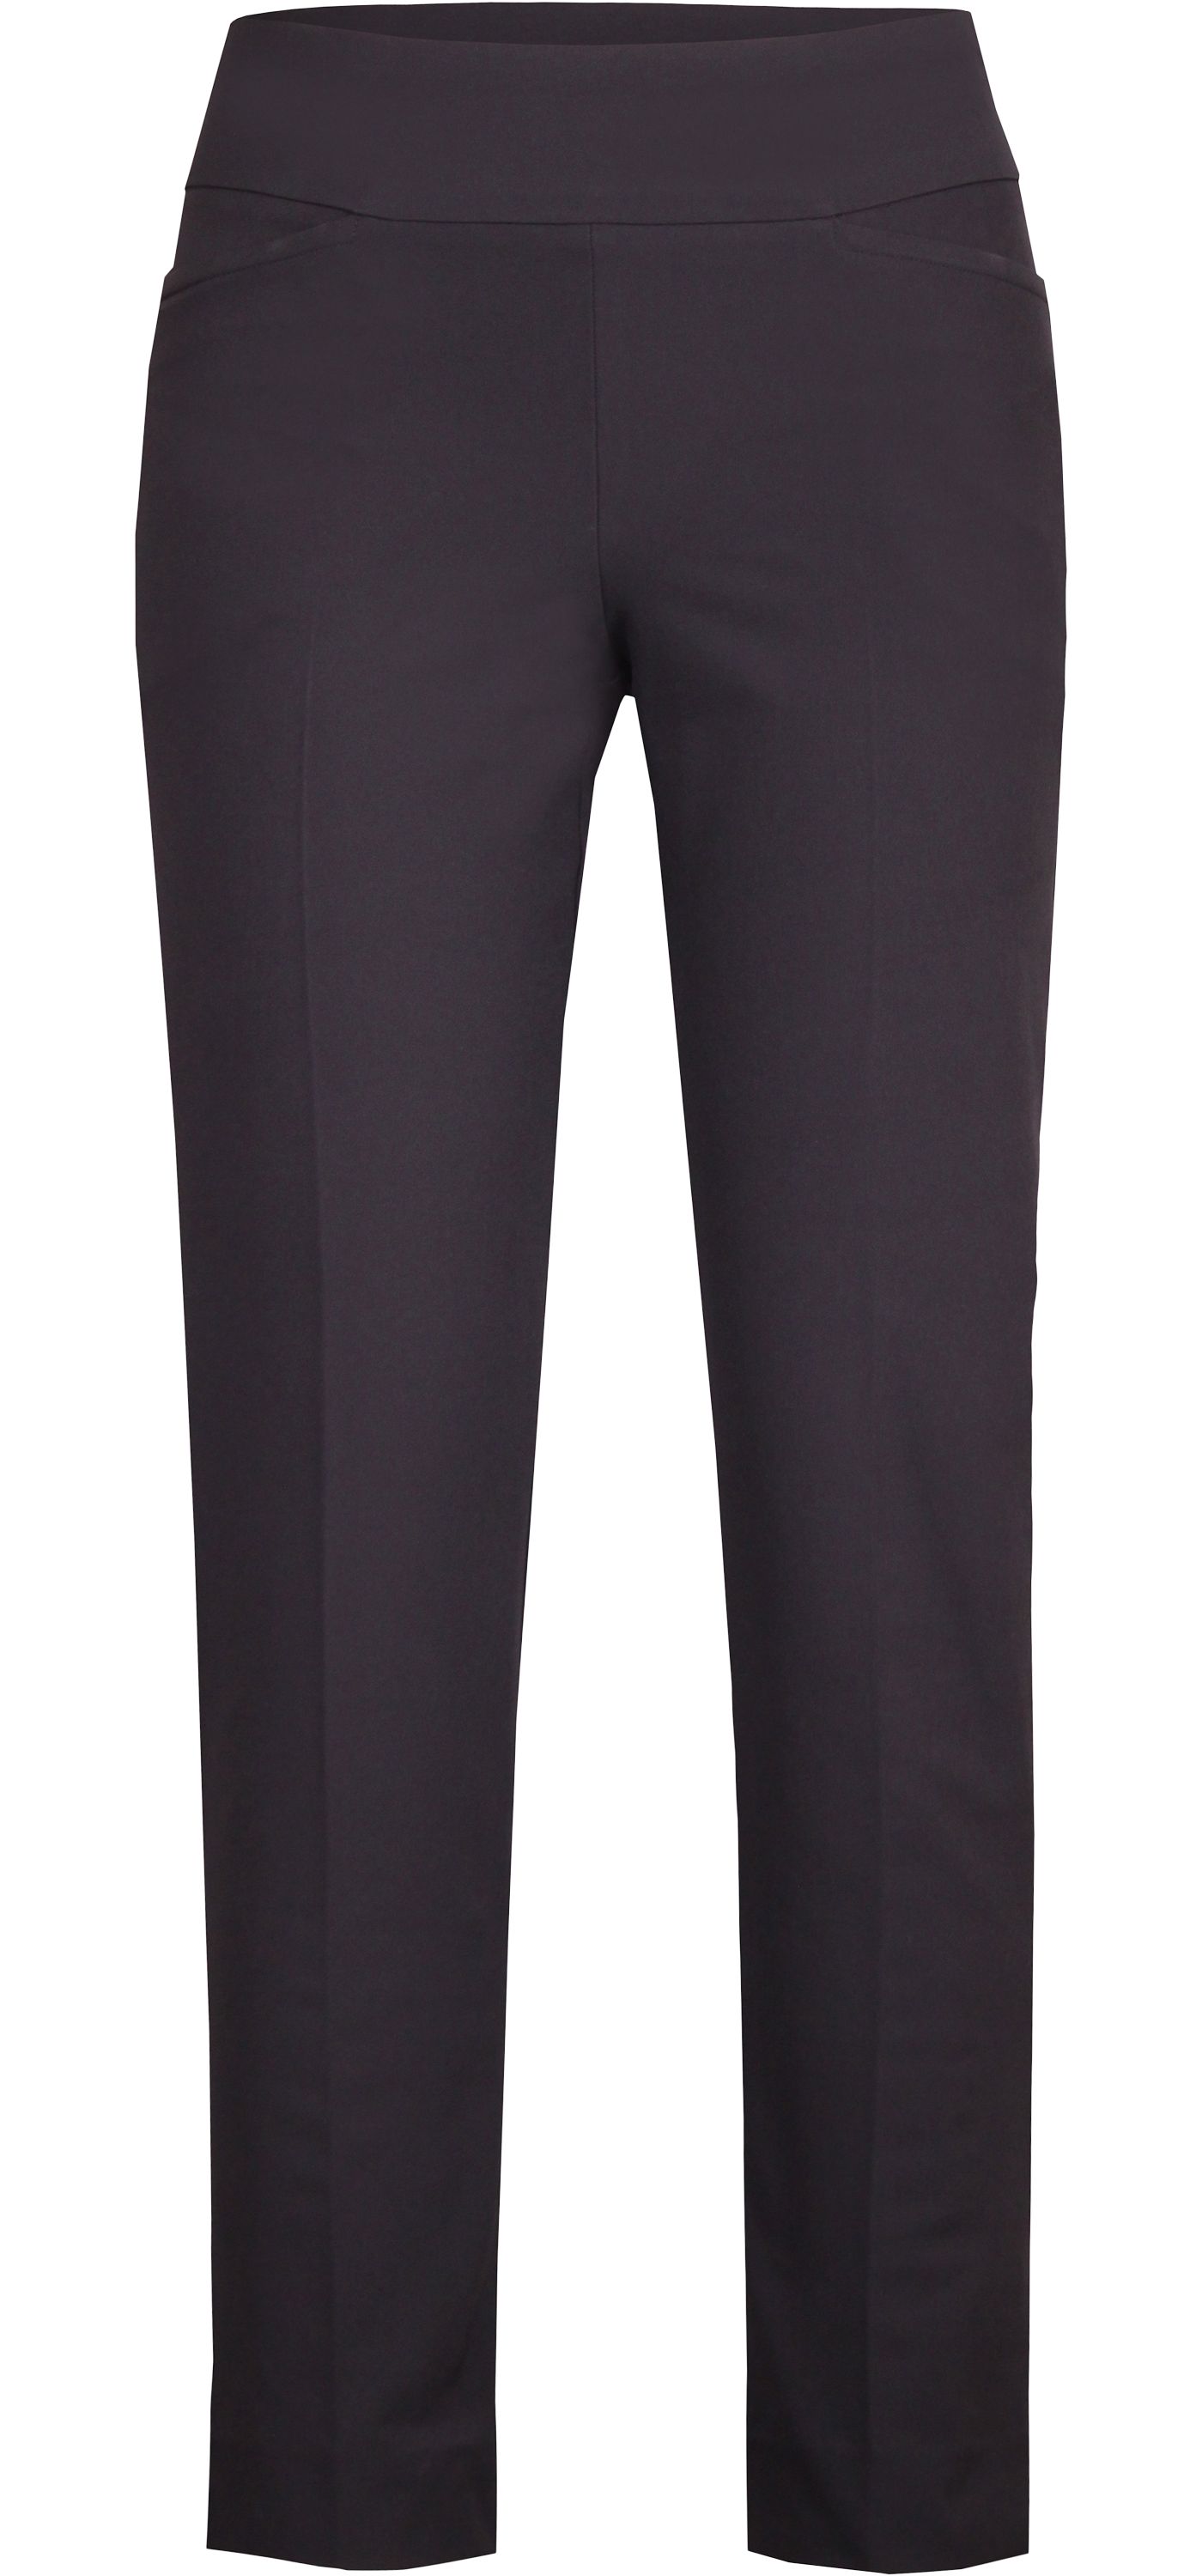 Tail Women's Mulligan Golf Ankle Pants | DICK'S Sporting Goods